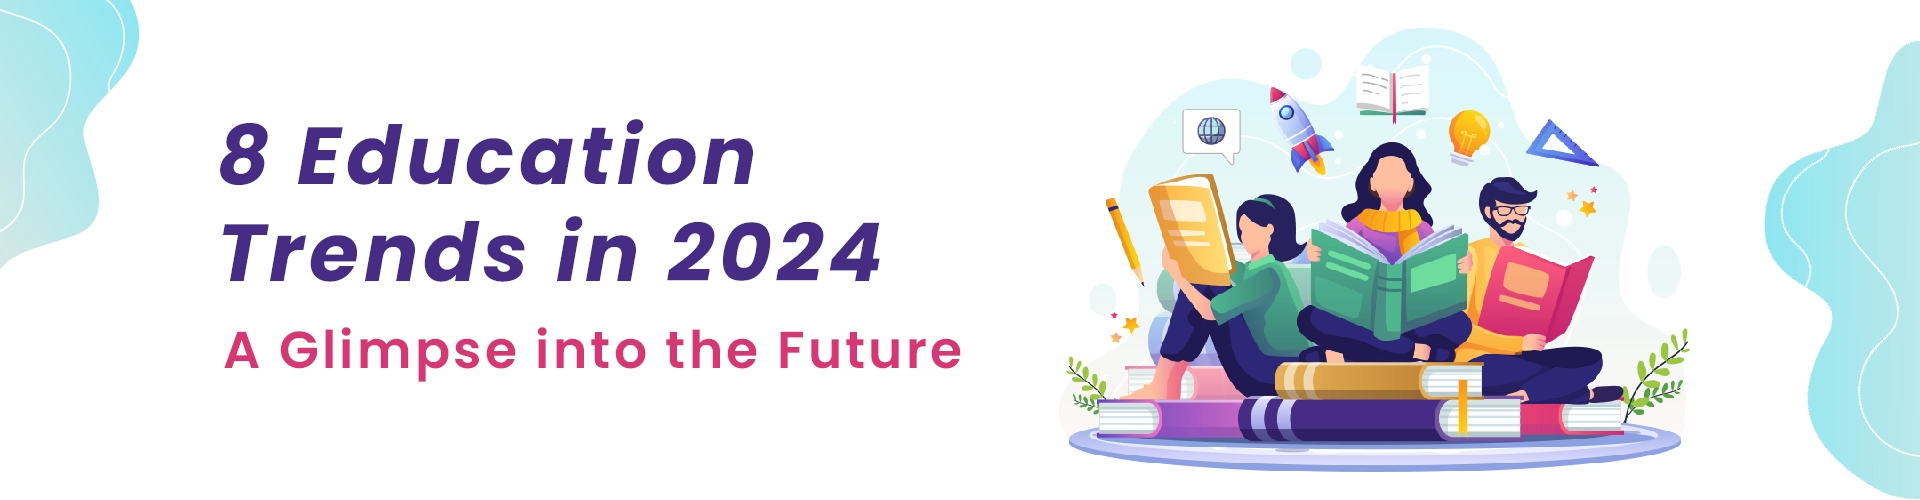 Top 8 Education Trends in 2024